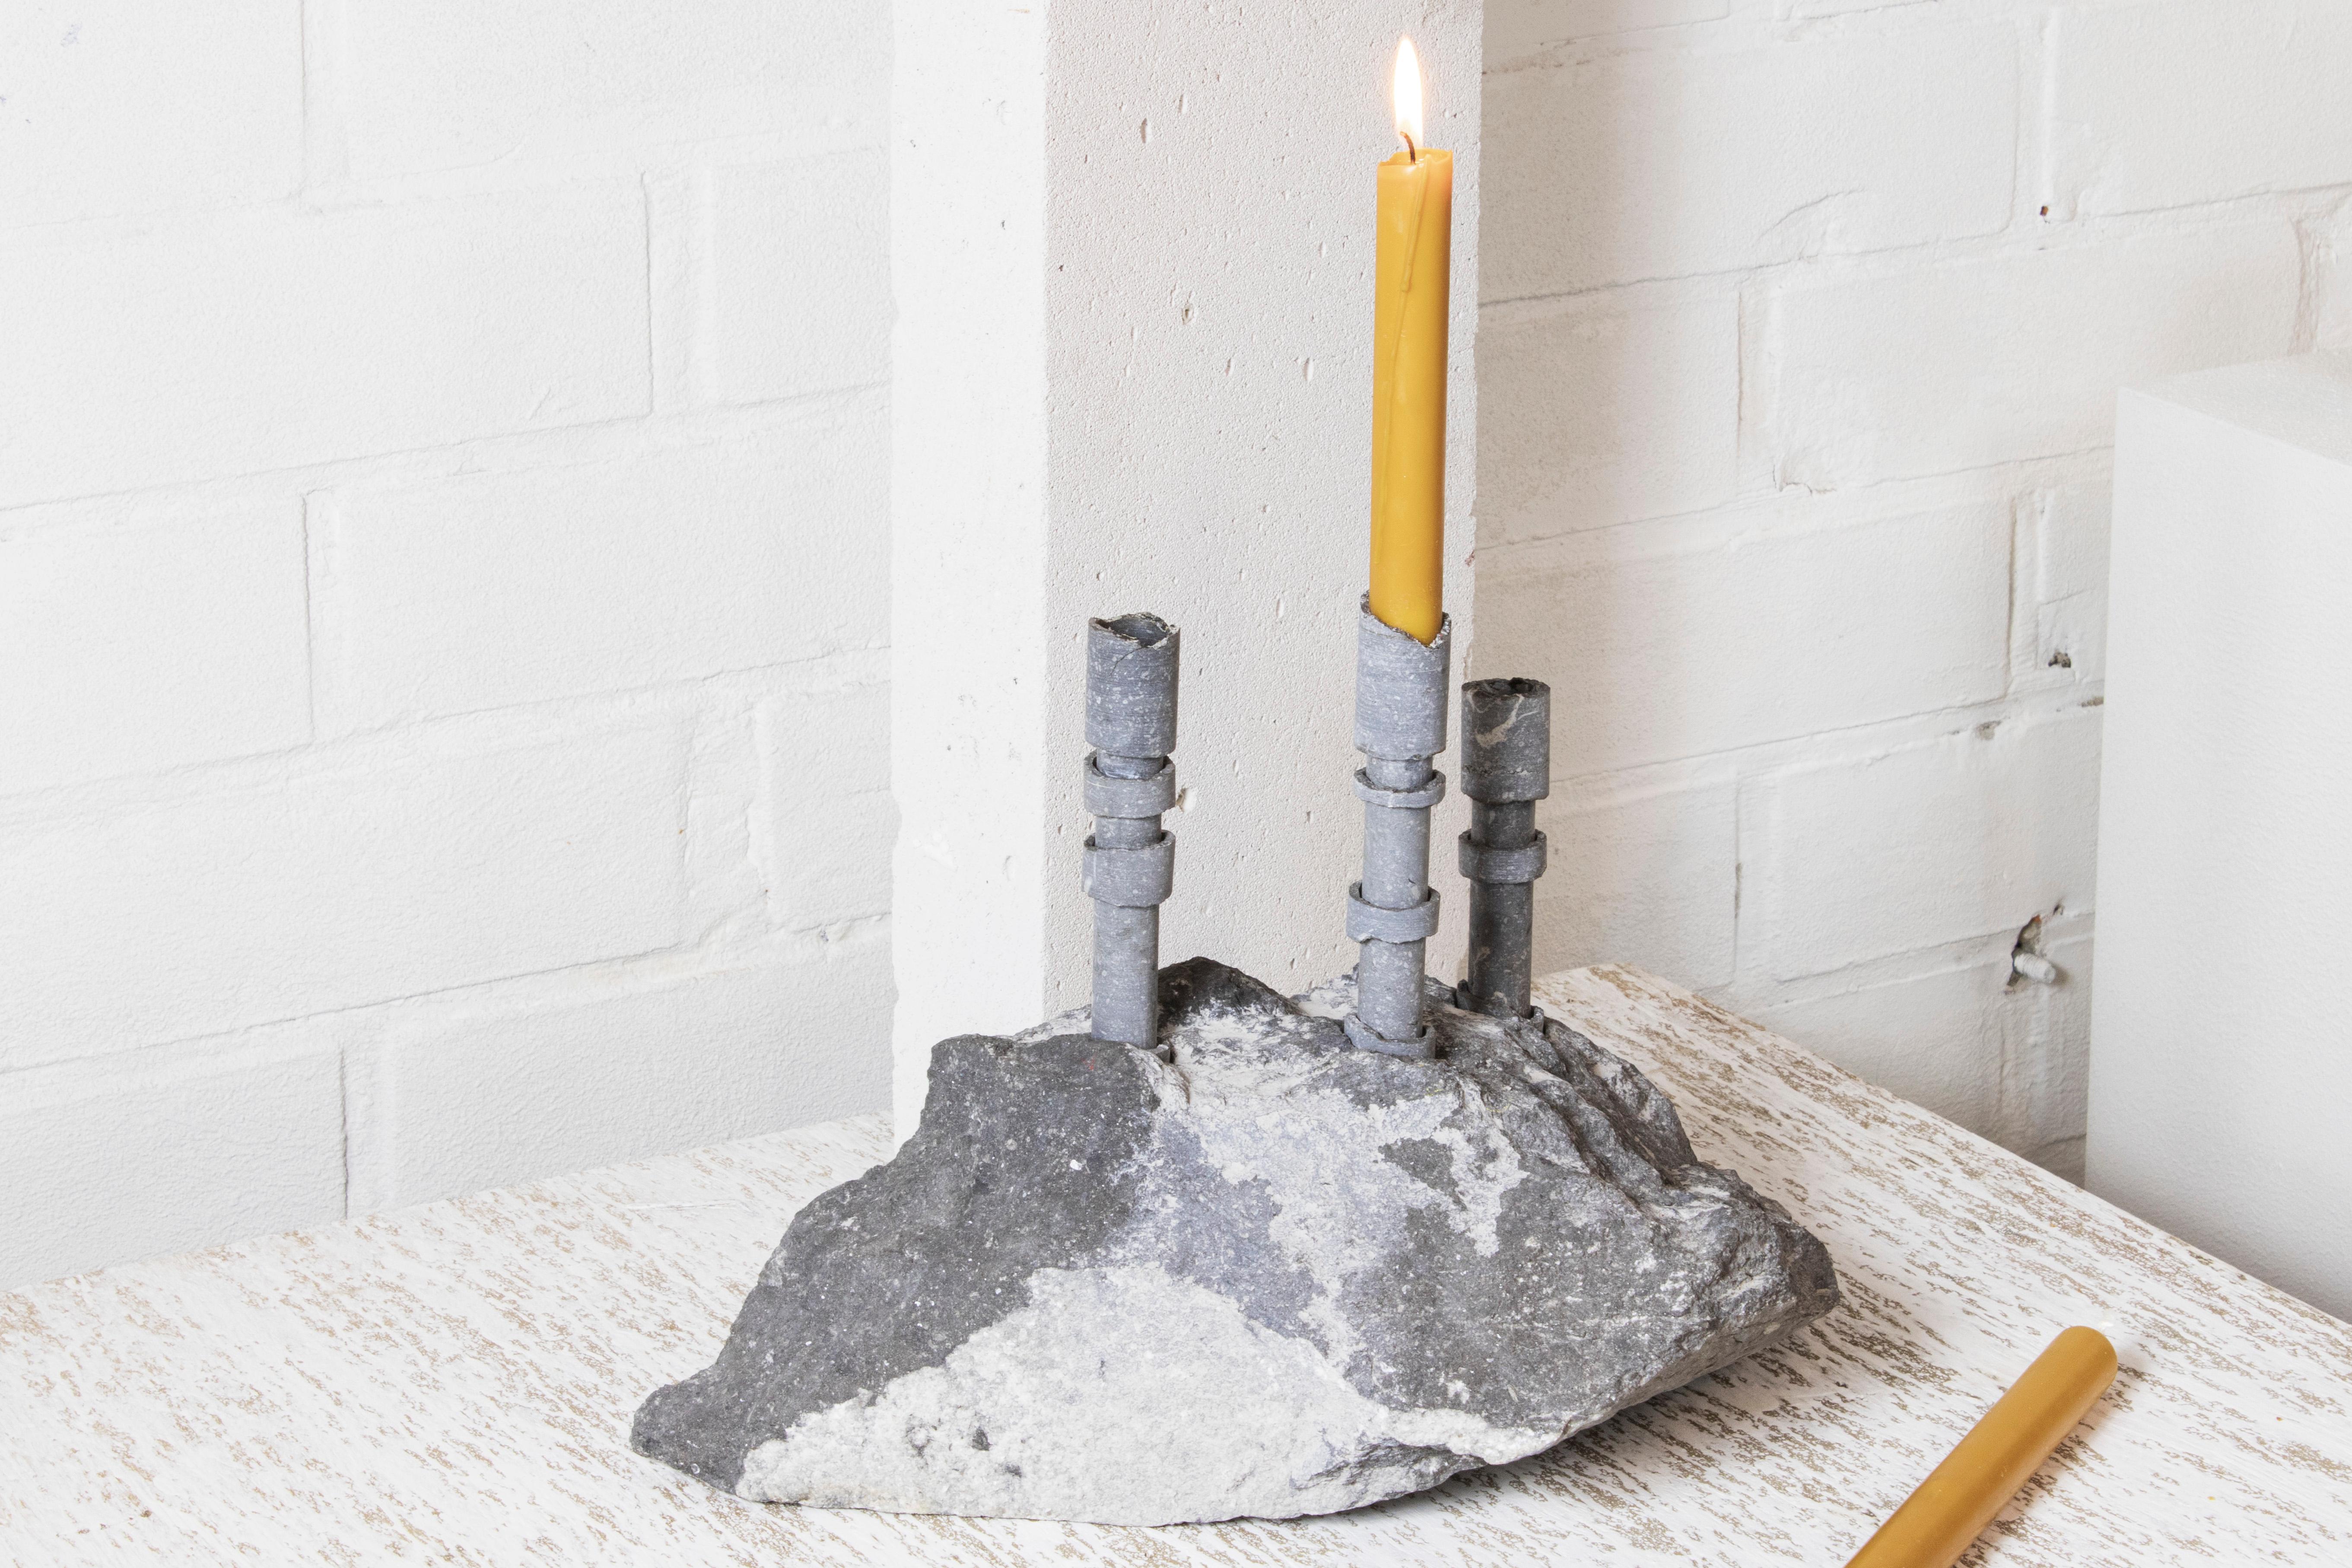 Blue Stone Abra Candelabra by Studio DO
Dimensions: D 41 x W 20.5 x H 19 cm
Materials: Blue stone, aluminum.
12 kg.

Stone and fire are connected in an ageless bond. A sparkle created by clashing two stones with each other has been igniting fire